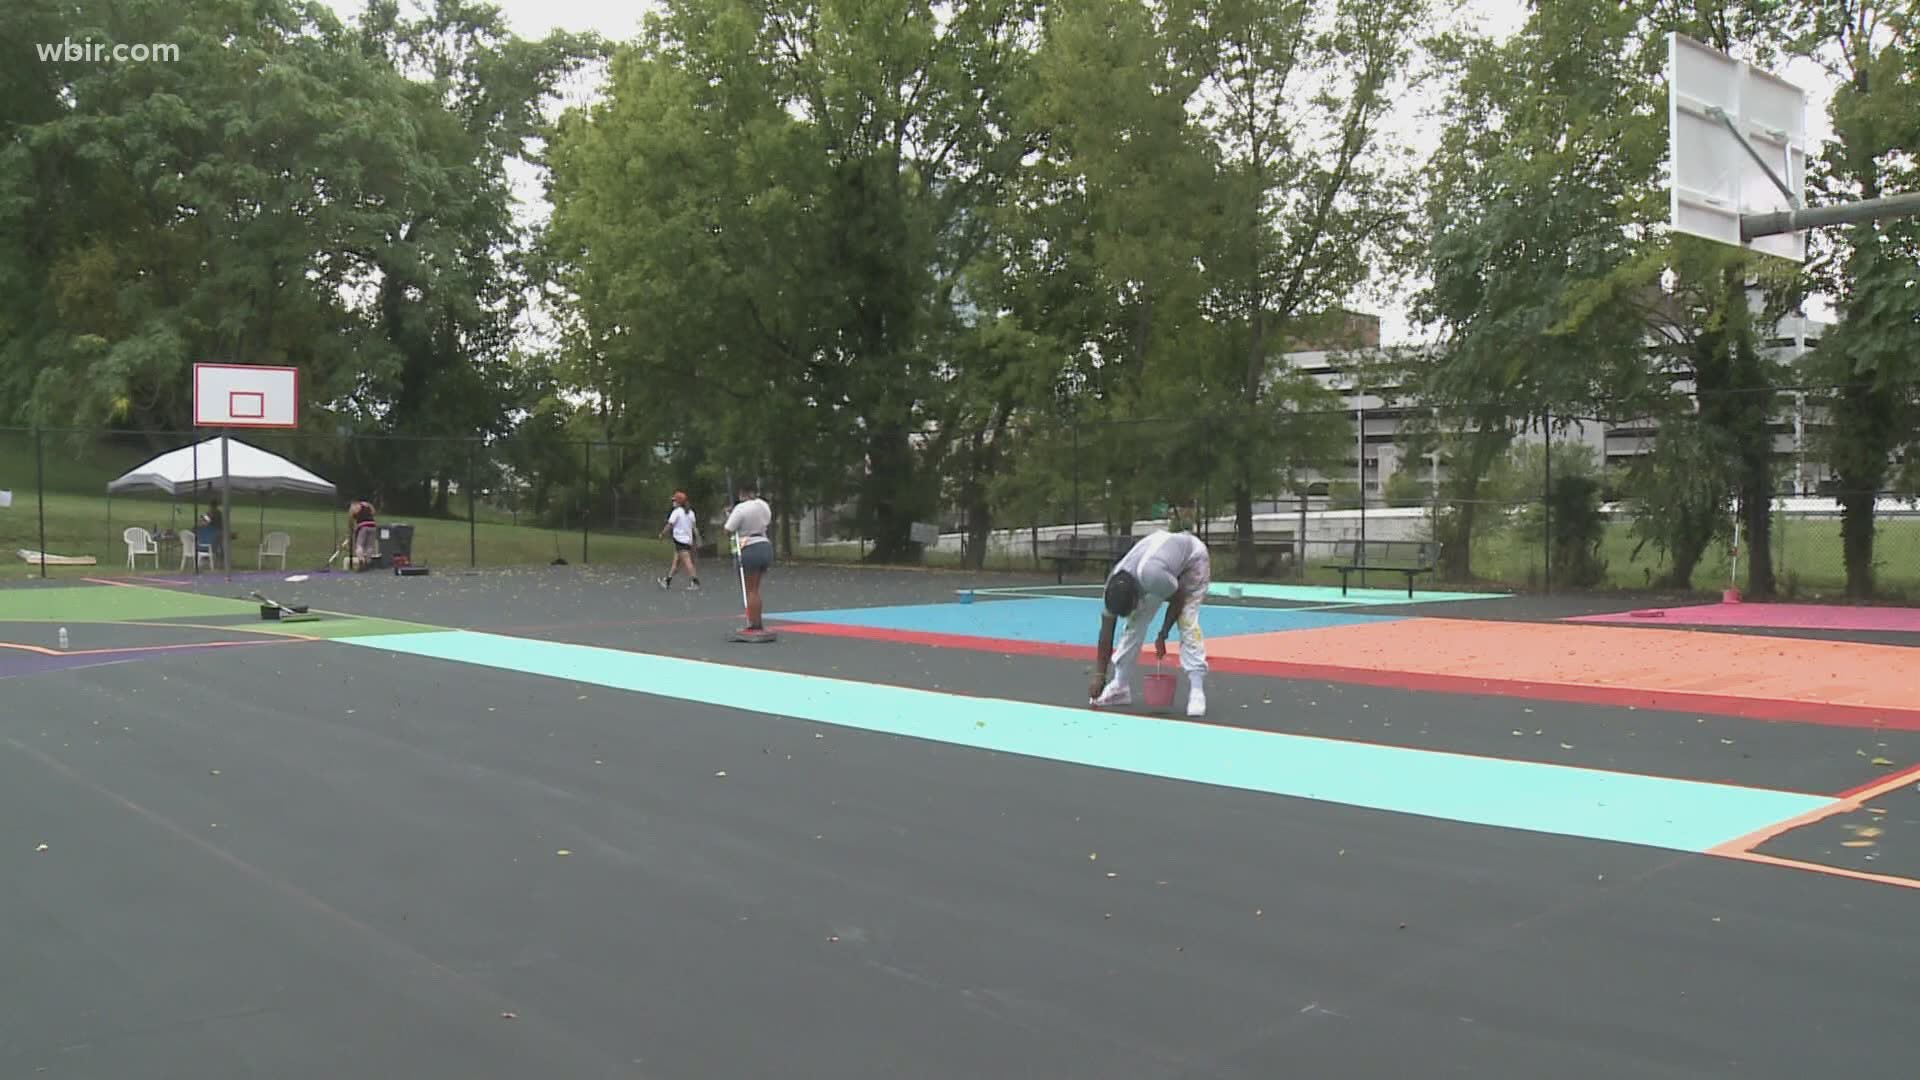 Volunteers from the community and local artists helped paint a colorful mural on the outdoor basketball courts at Cal Johnson Recreation Center.